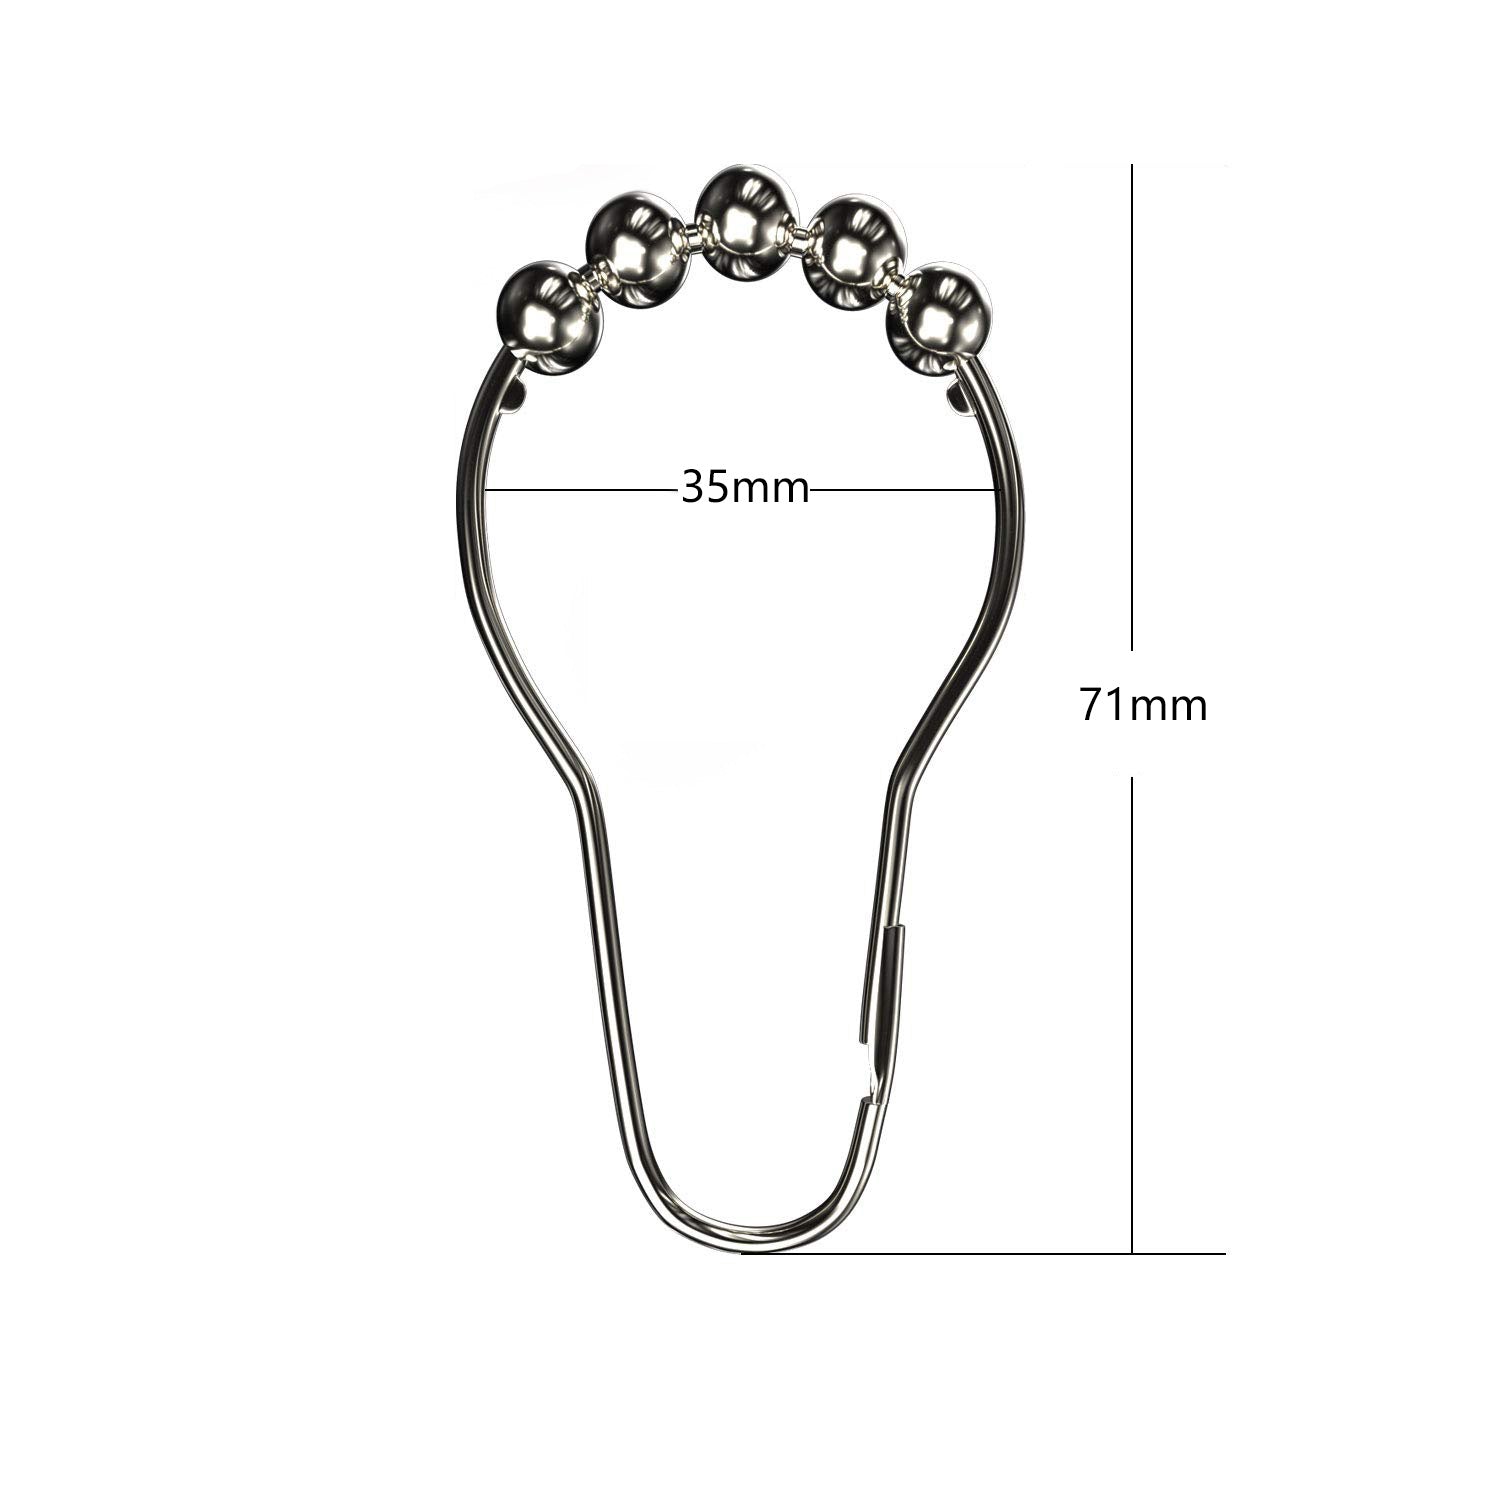 Rustproof Metal Glide Curtain Rings for Bedroom/Bathroom Curtains Rods 10 Pcs KGORGE Store